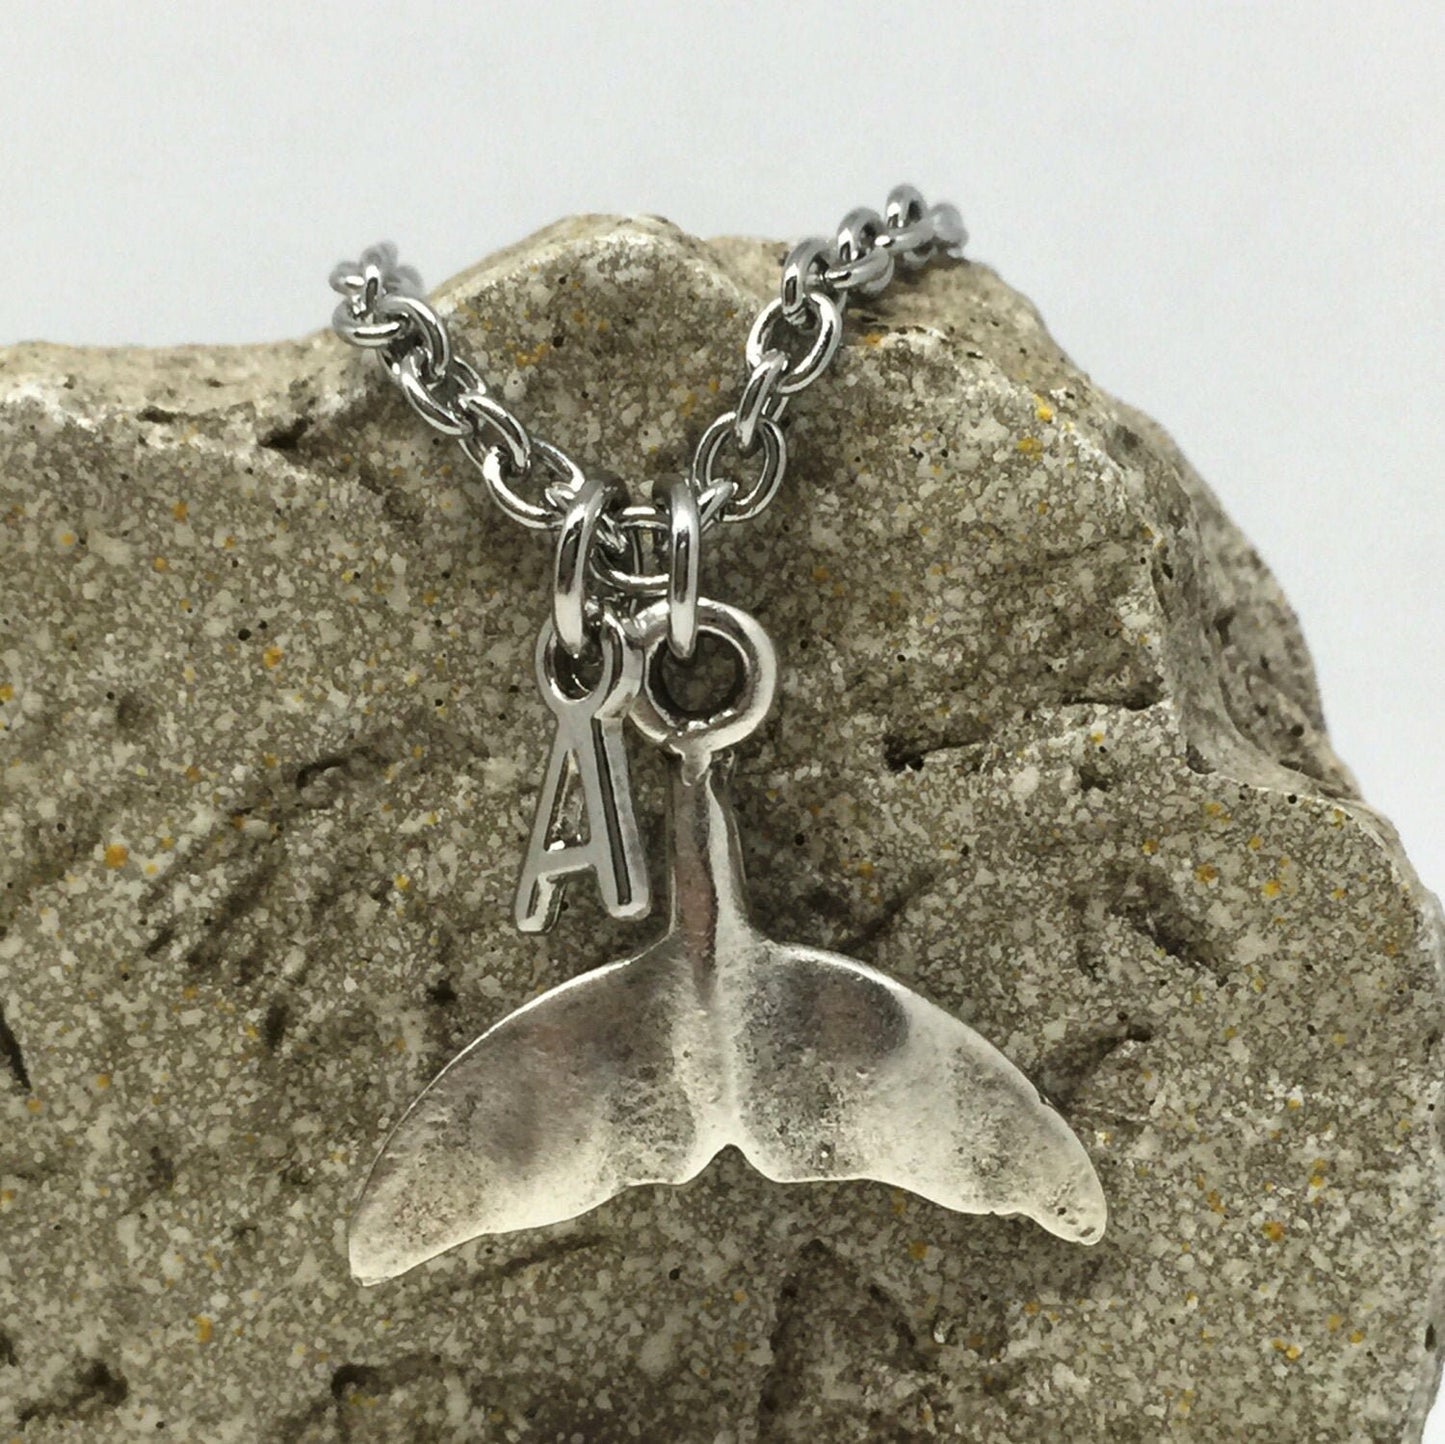 Whale tail save the whales charm necklace stainless steel sterling silver chain lead nickel free hypoallergenic